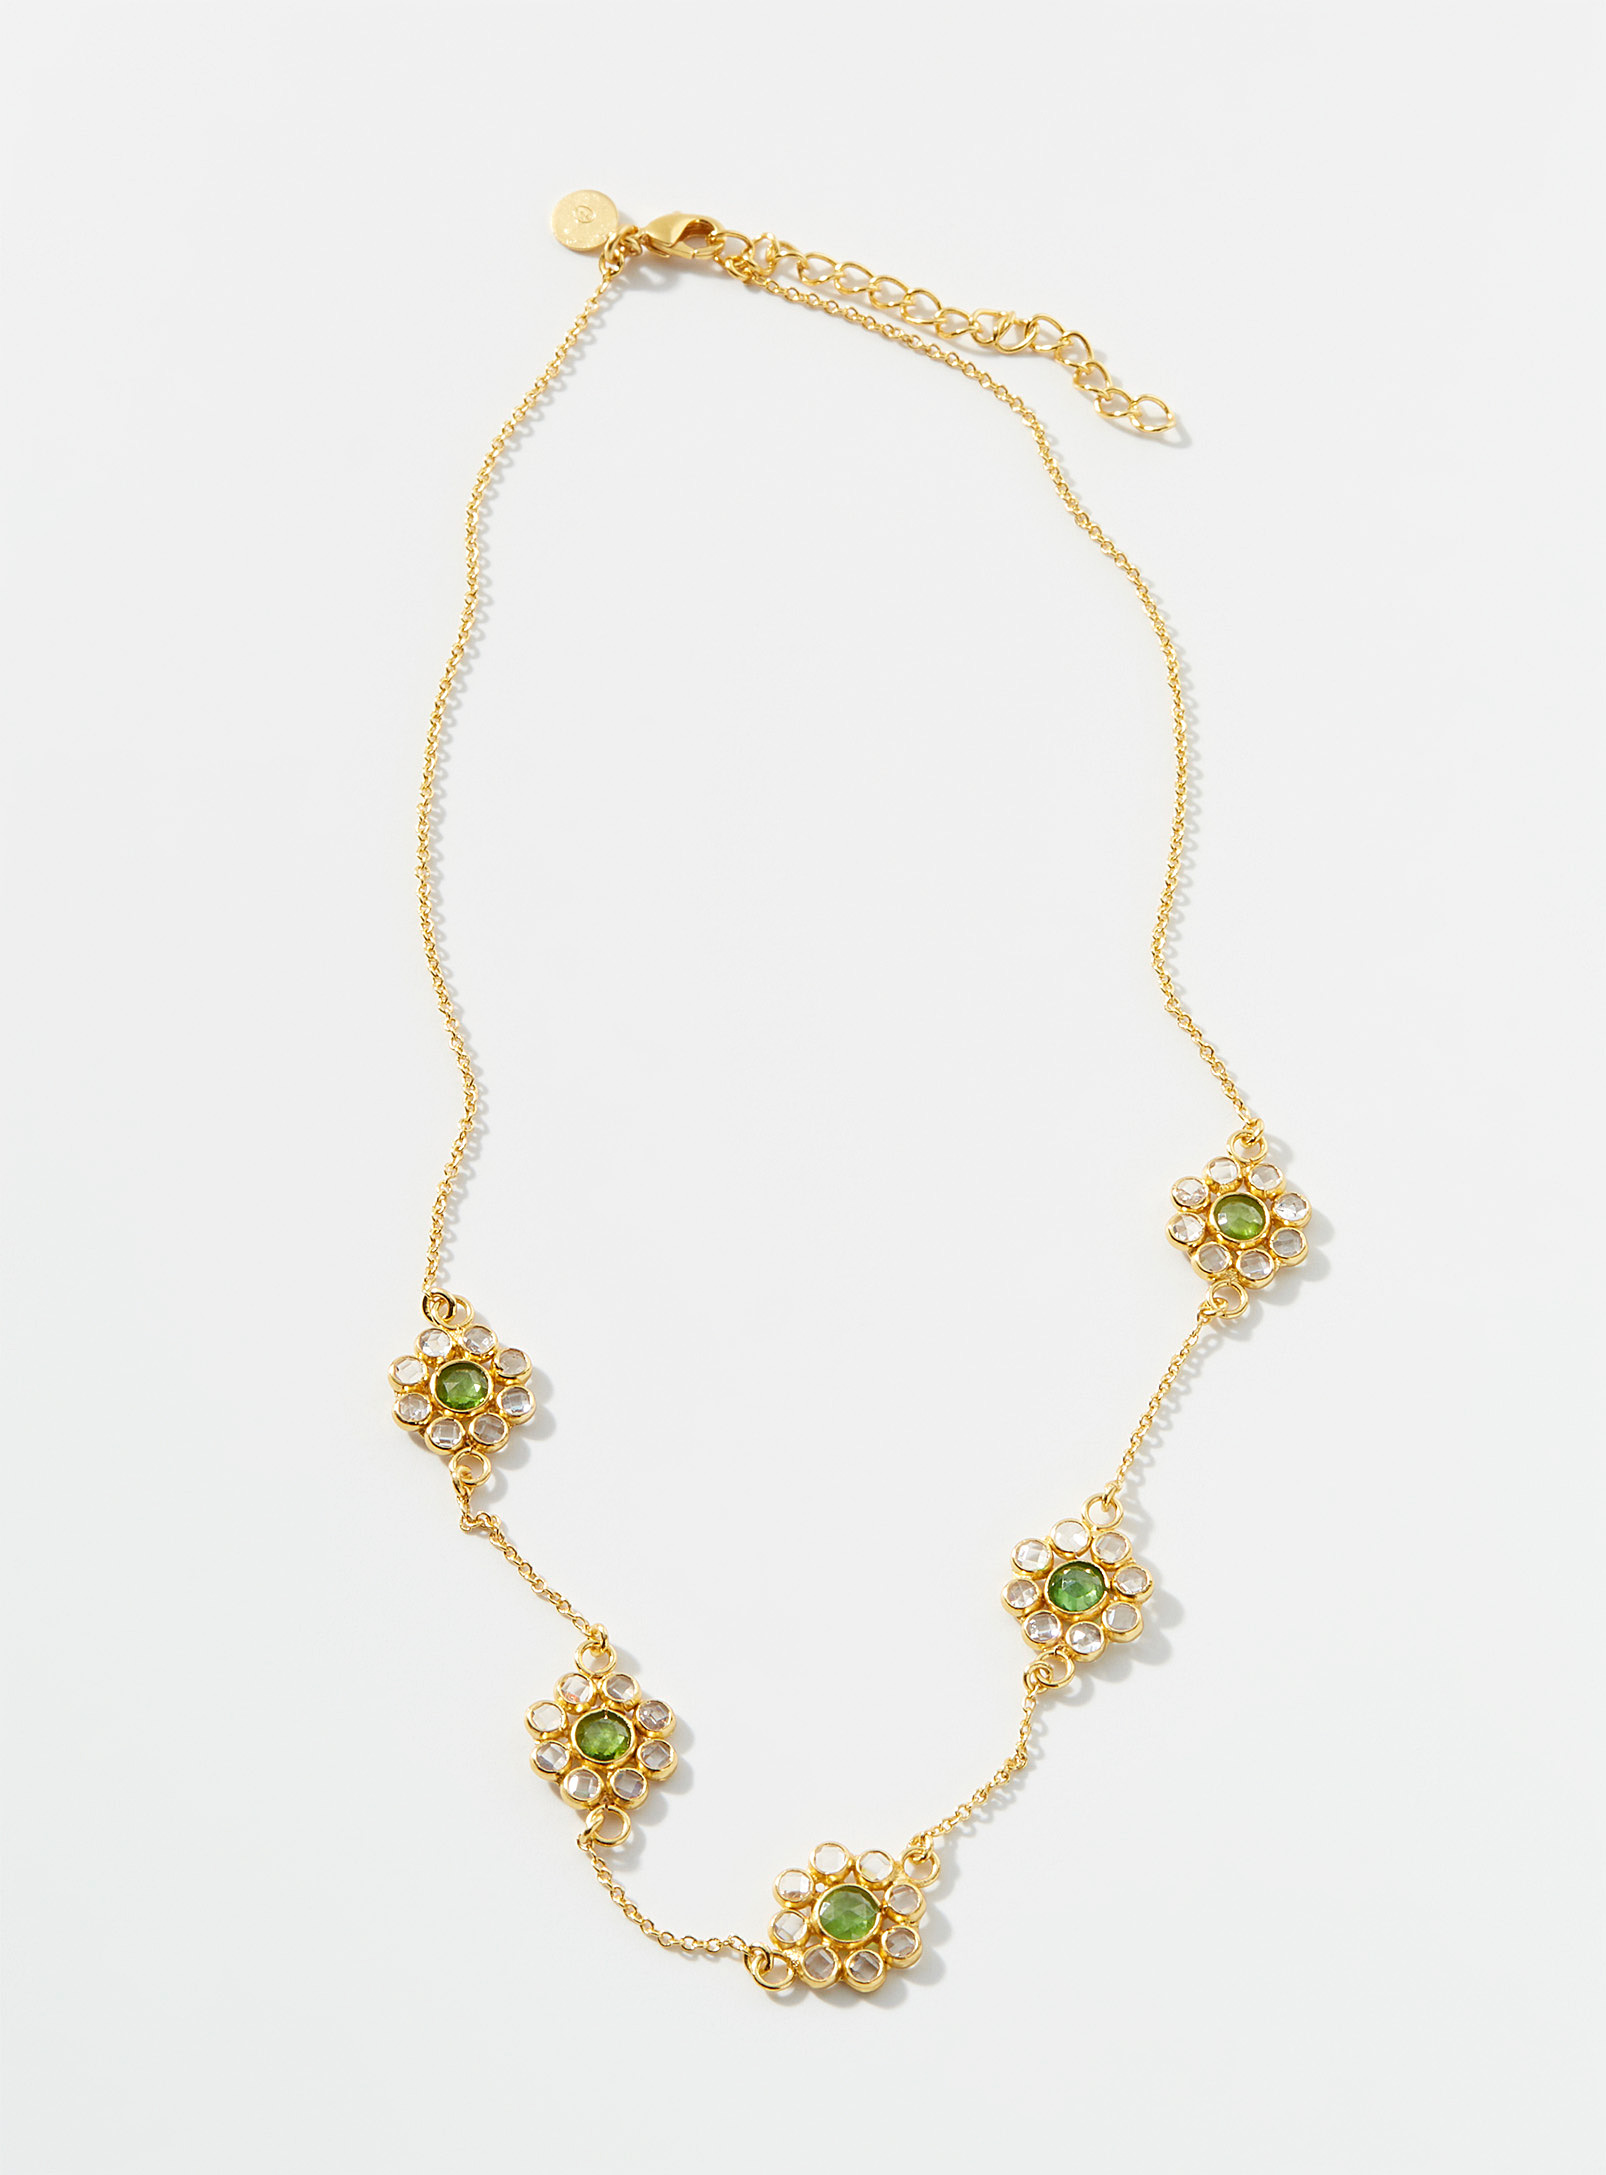 Diaperis Crystalline Flowers Chain In Gold